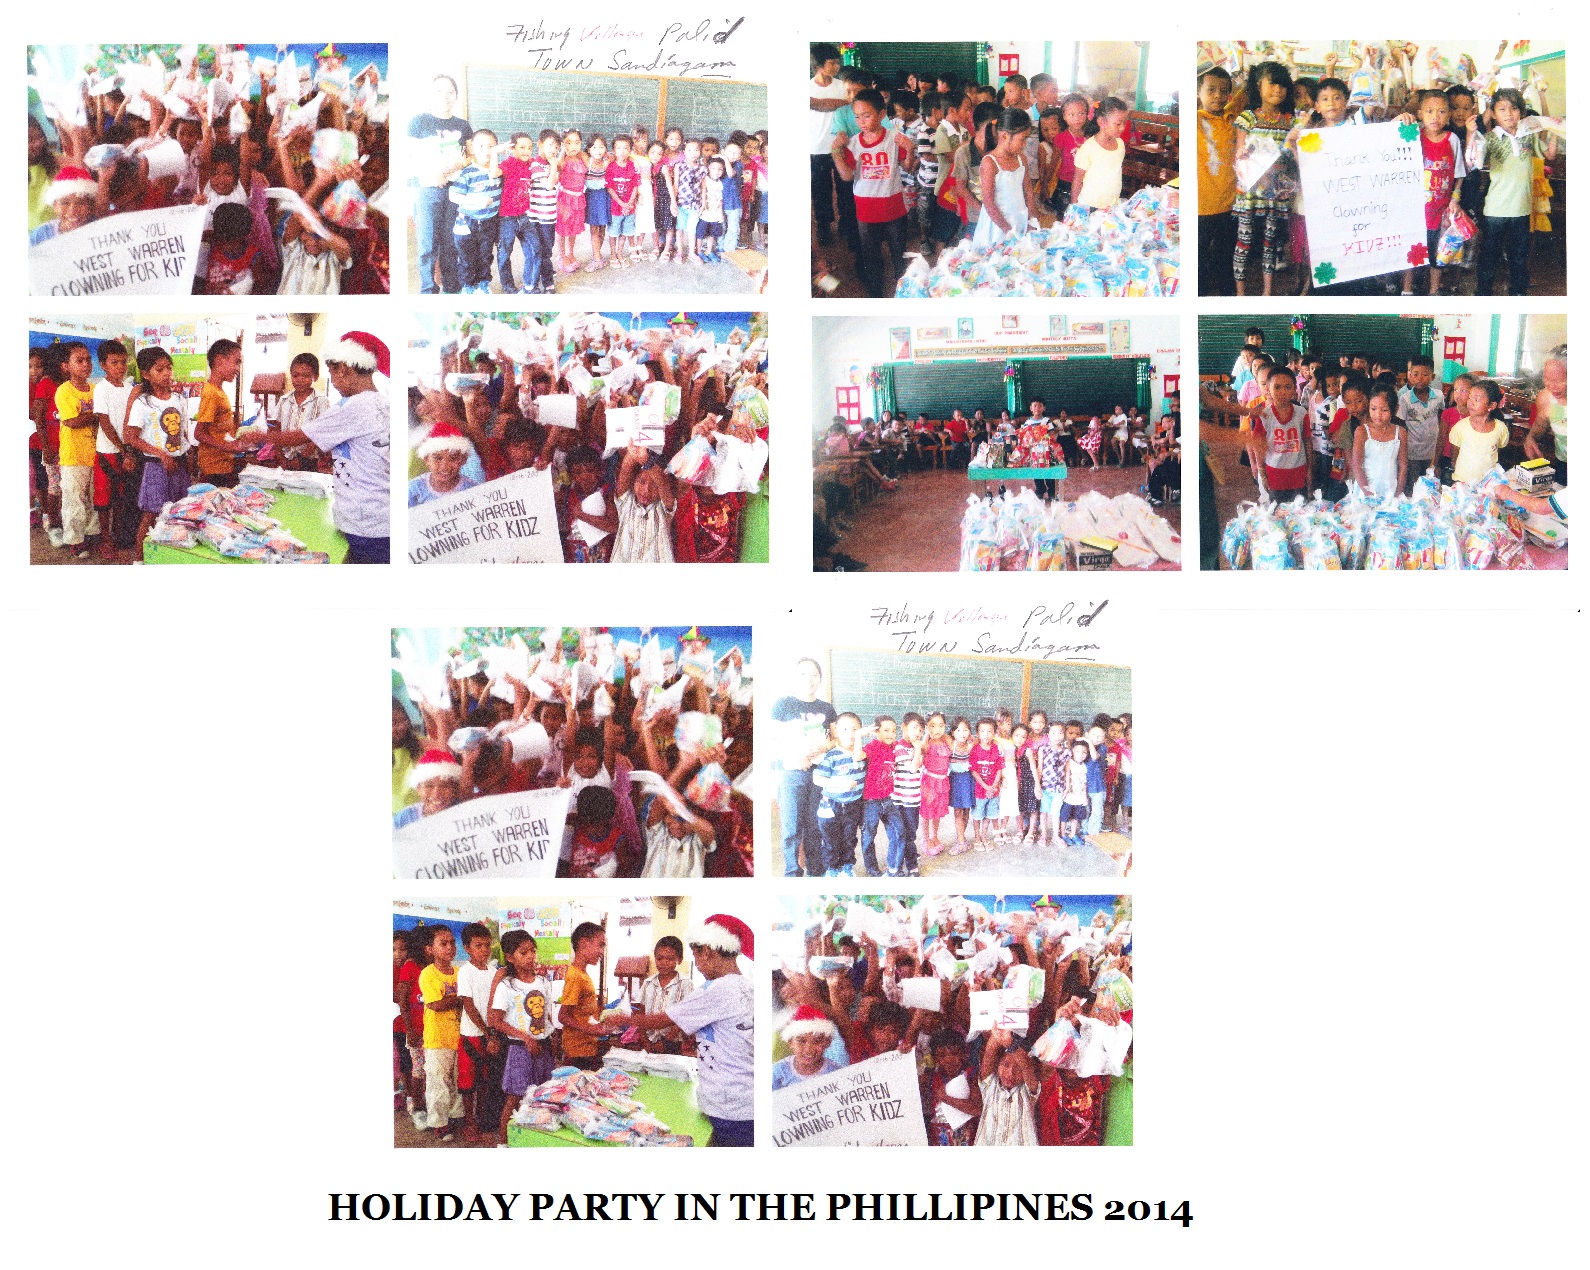 Phillipines_Holiday_Party_2014.jpg